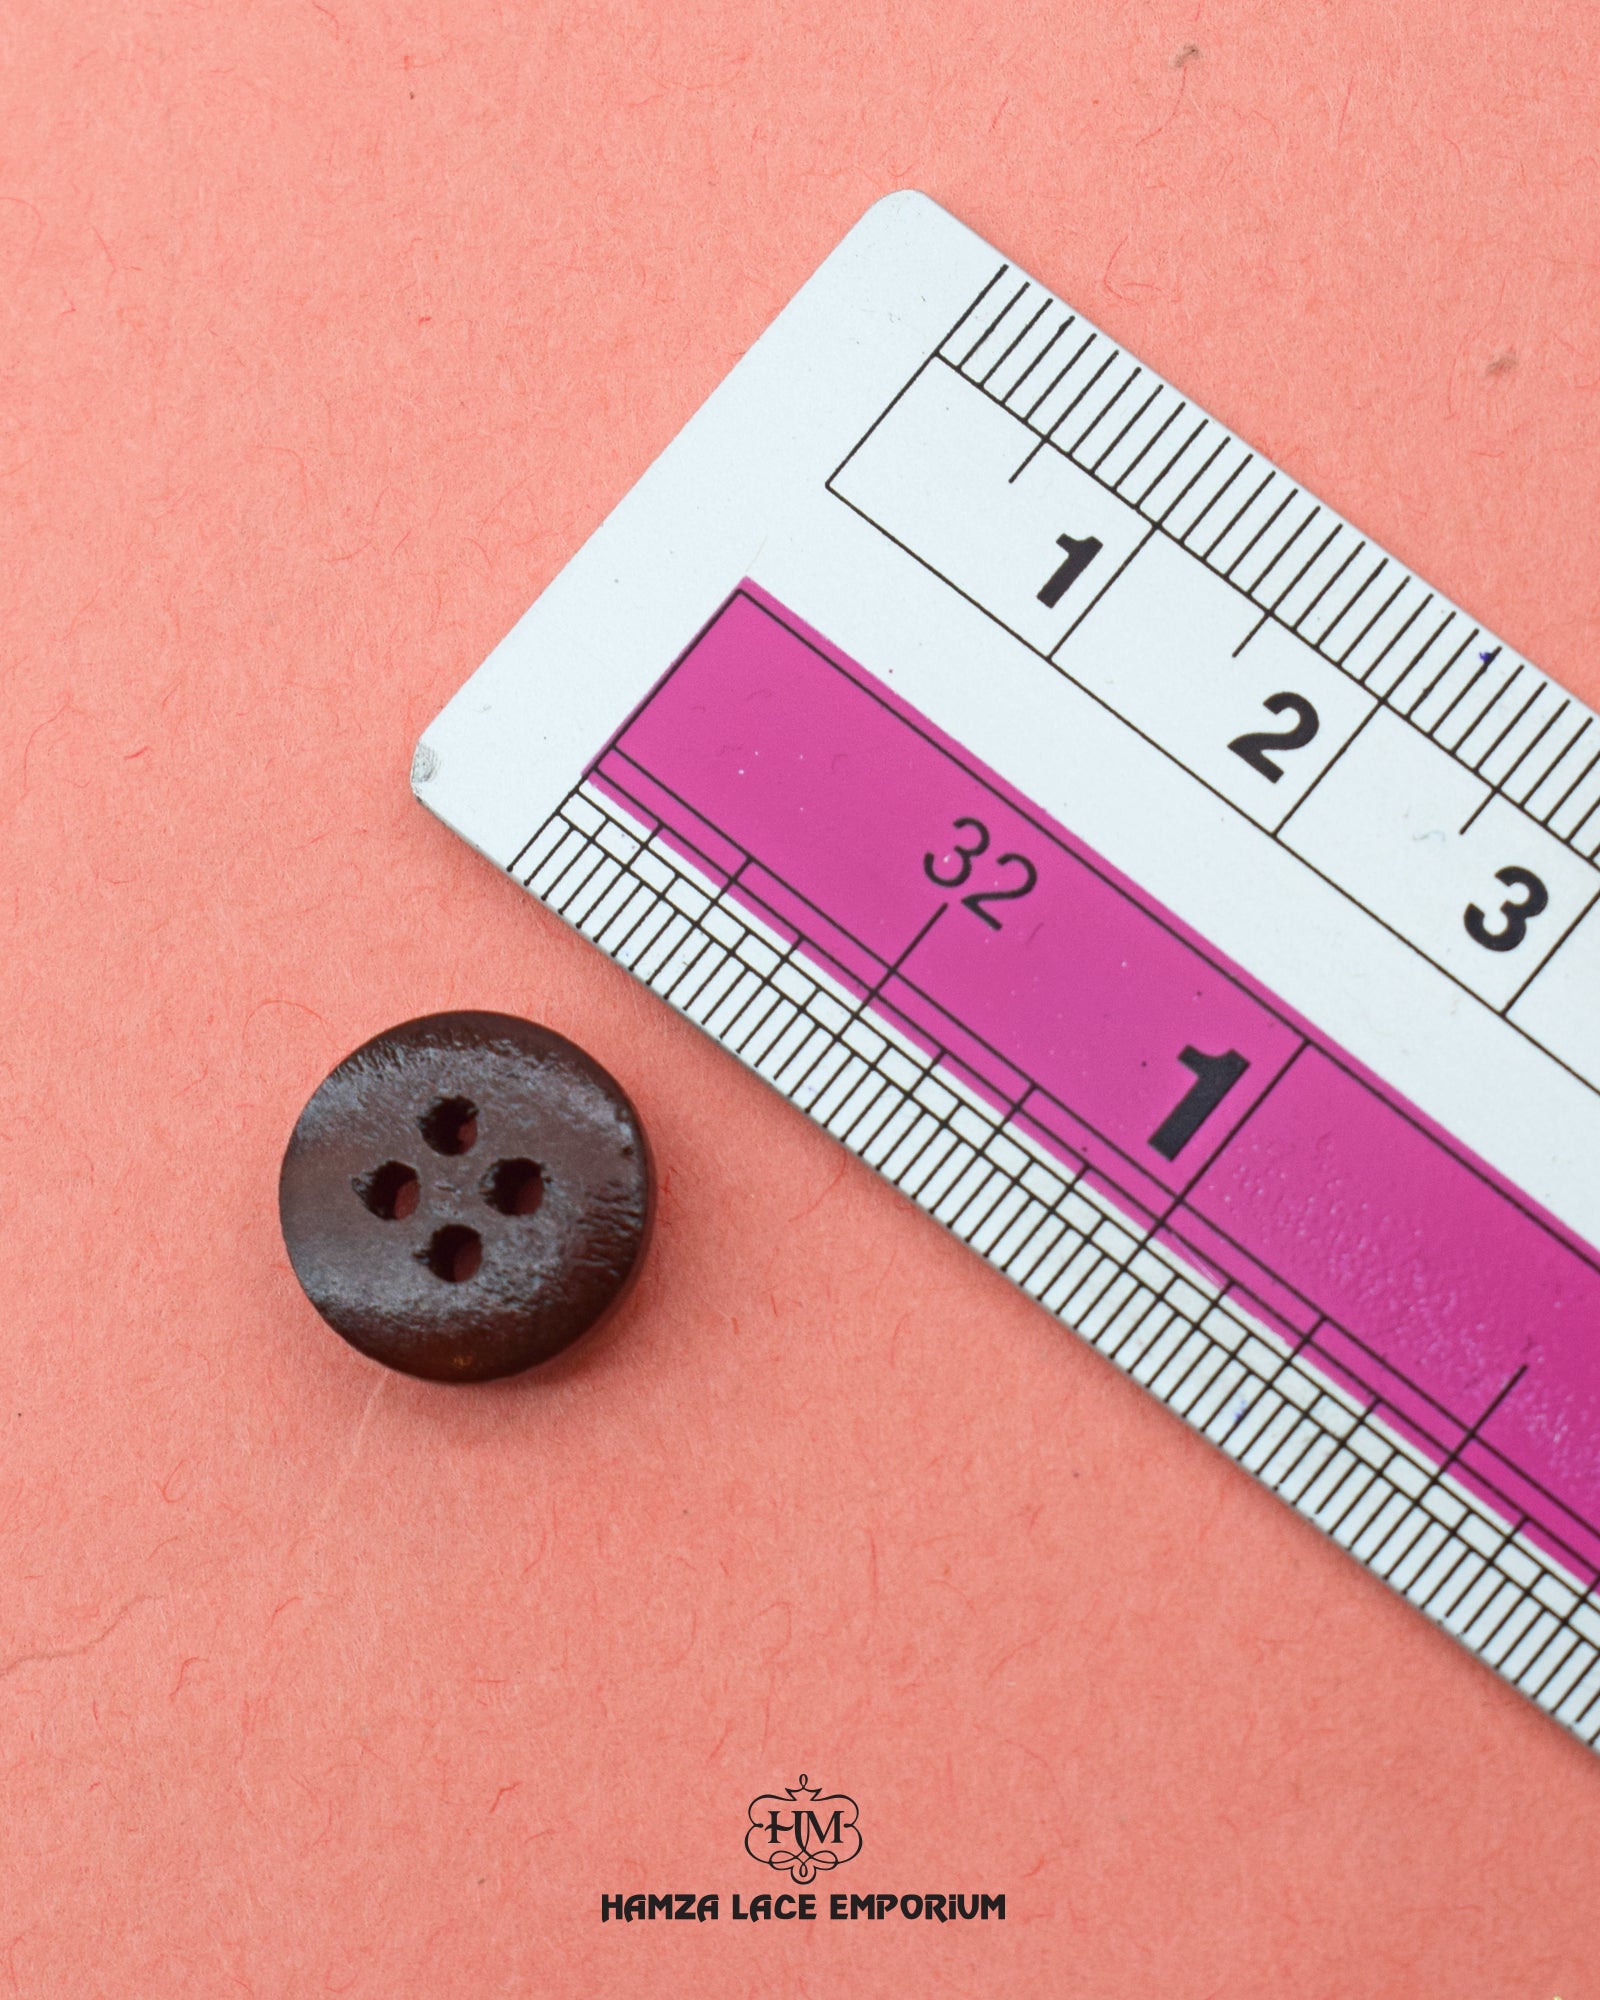 The size of the Beautifully designed 'Four Hole Wood Button WB109' is measured by using a ruler